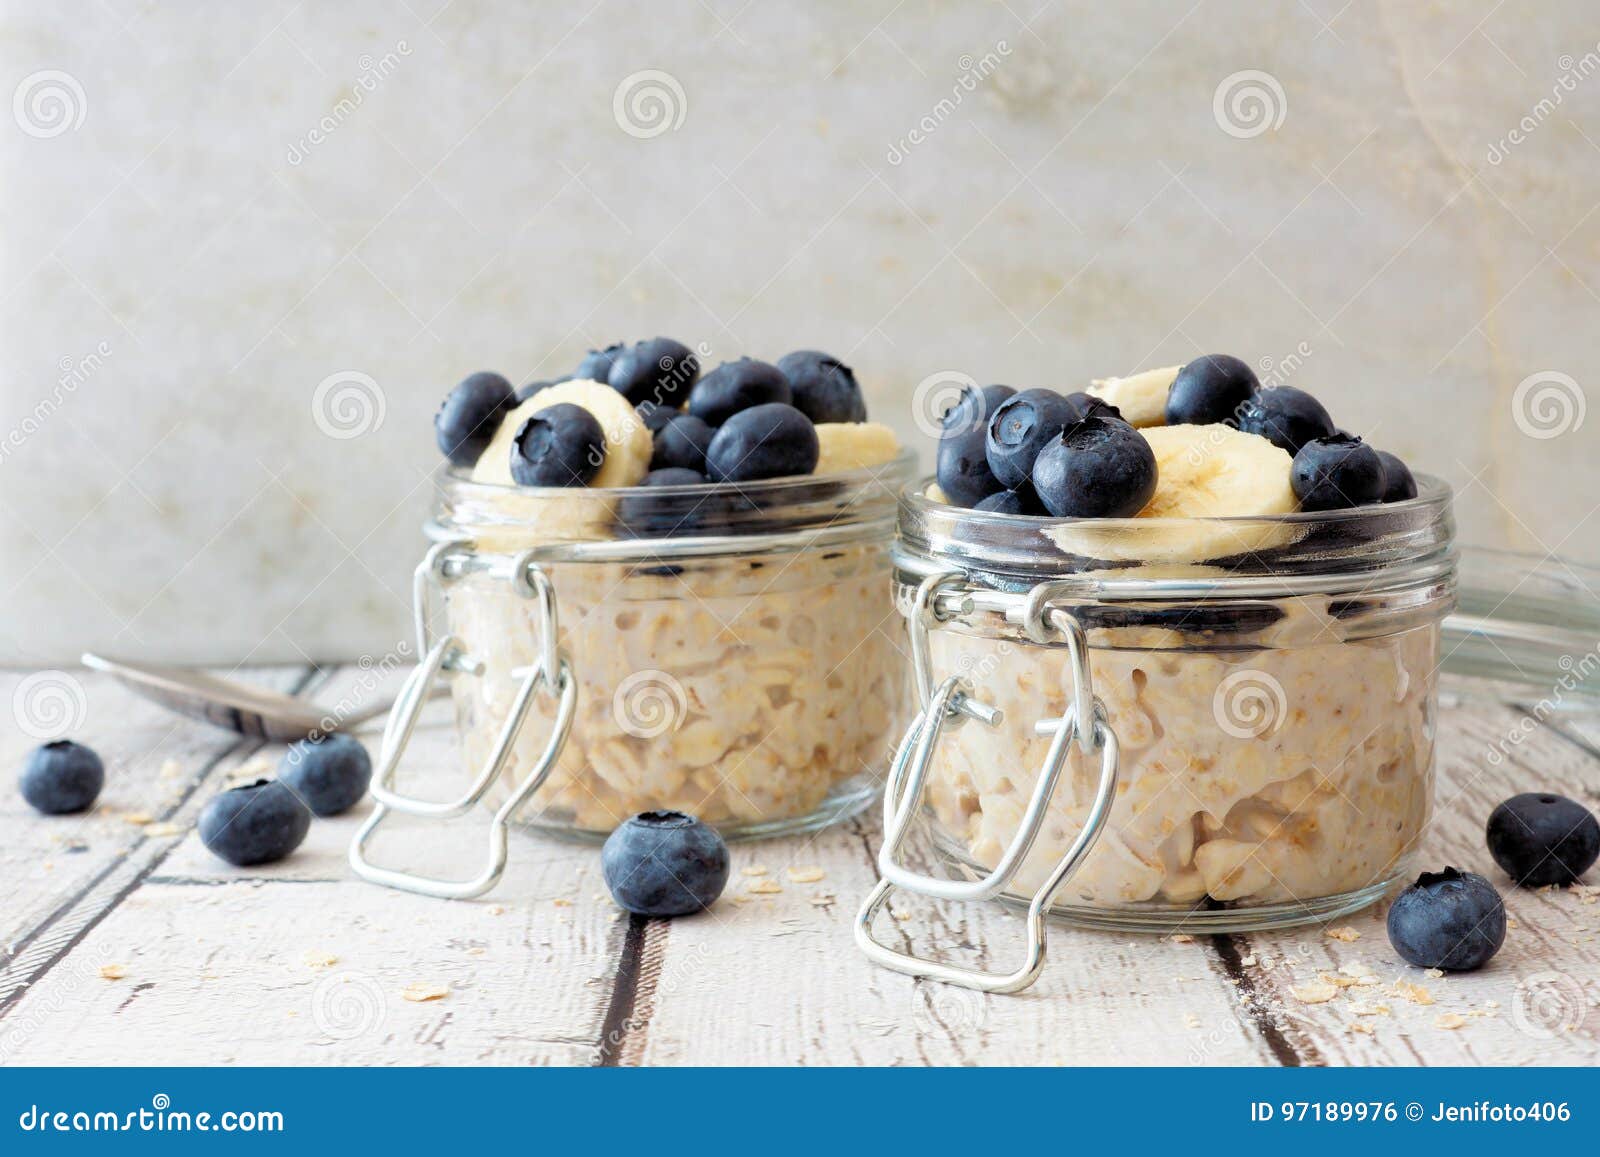 overnight oats with blueberries and bananas on a white wood background